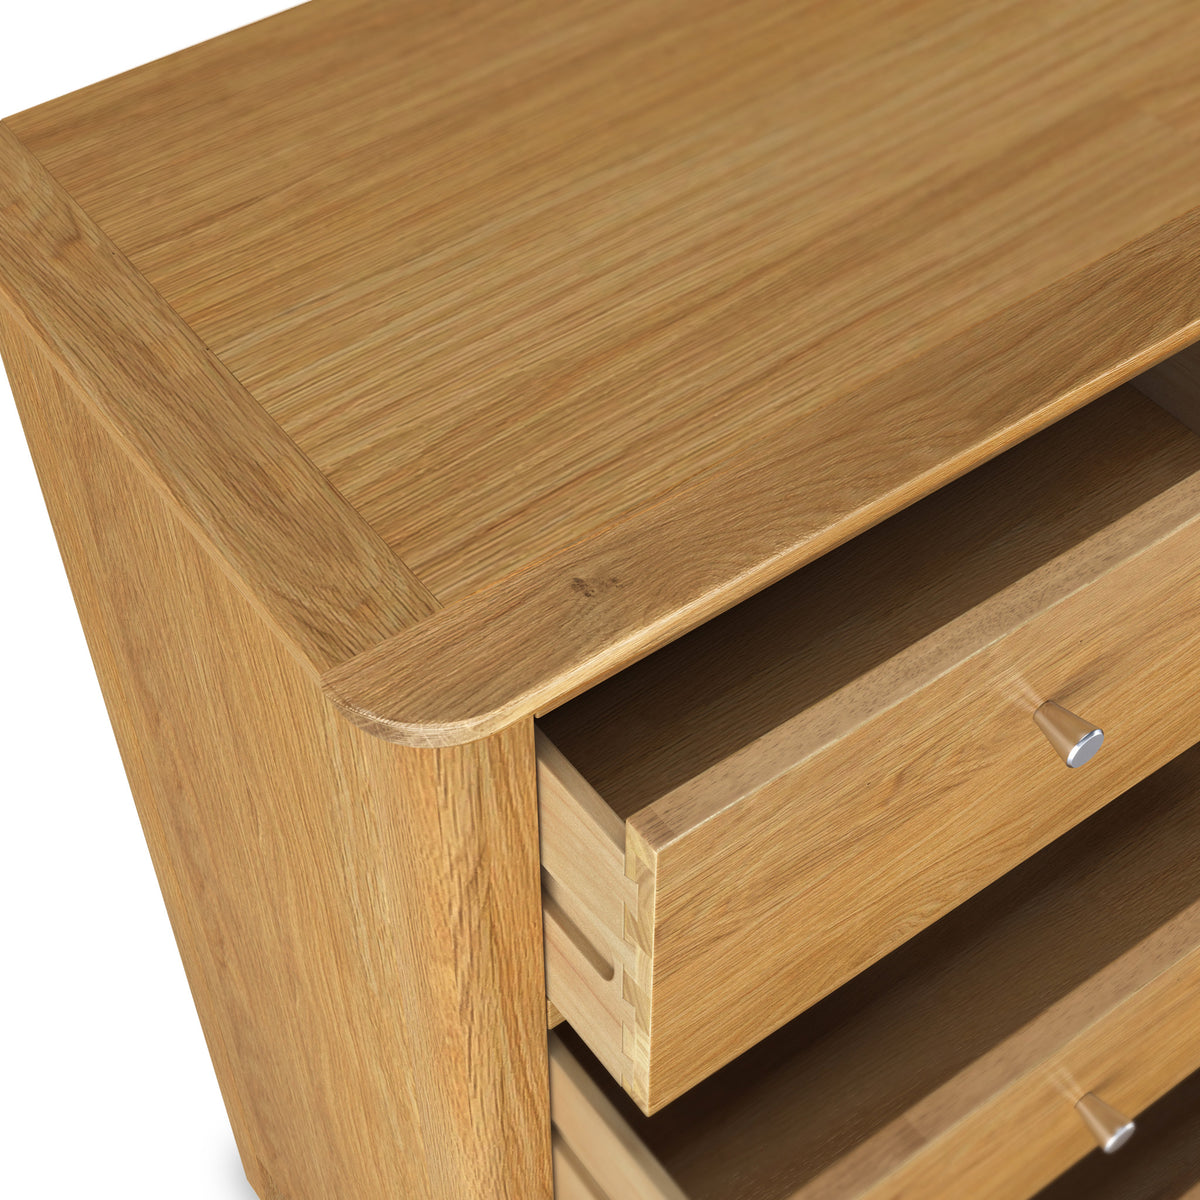 Saxon Oak 2 Over 3 Chest of Drawers by Roseland Furniture